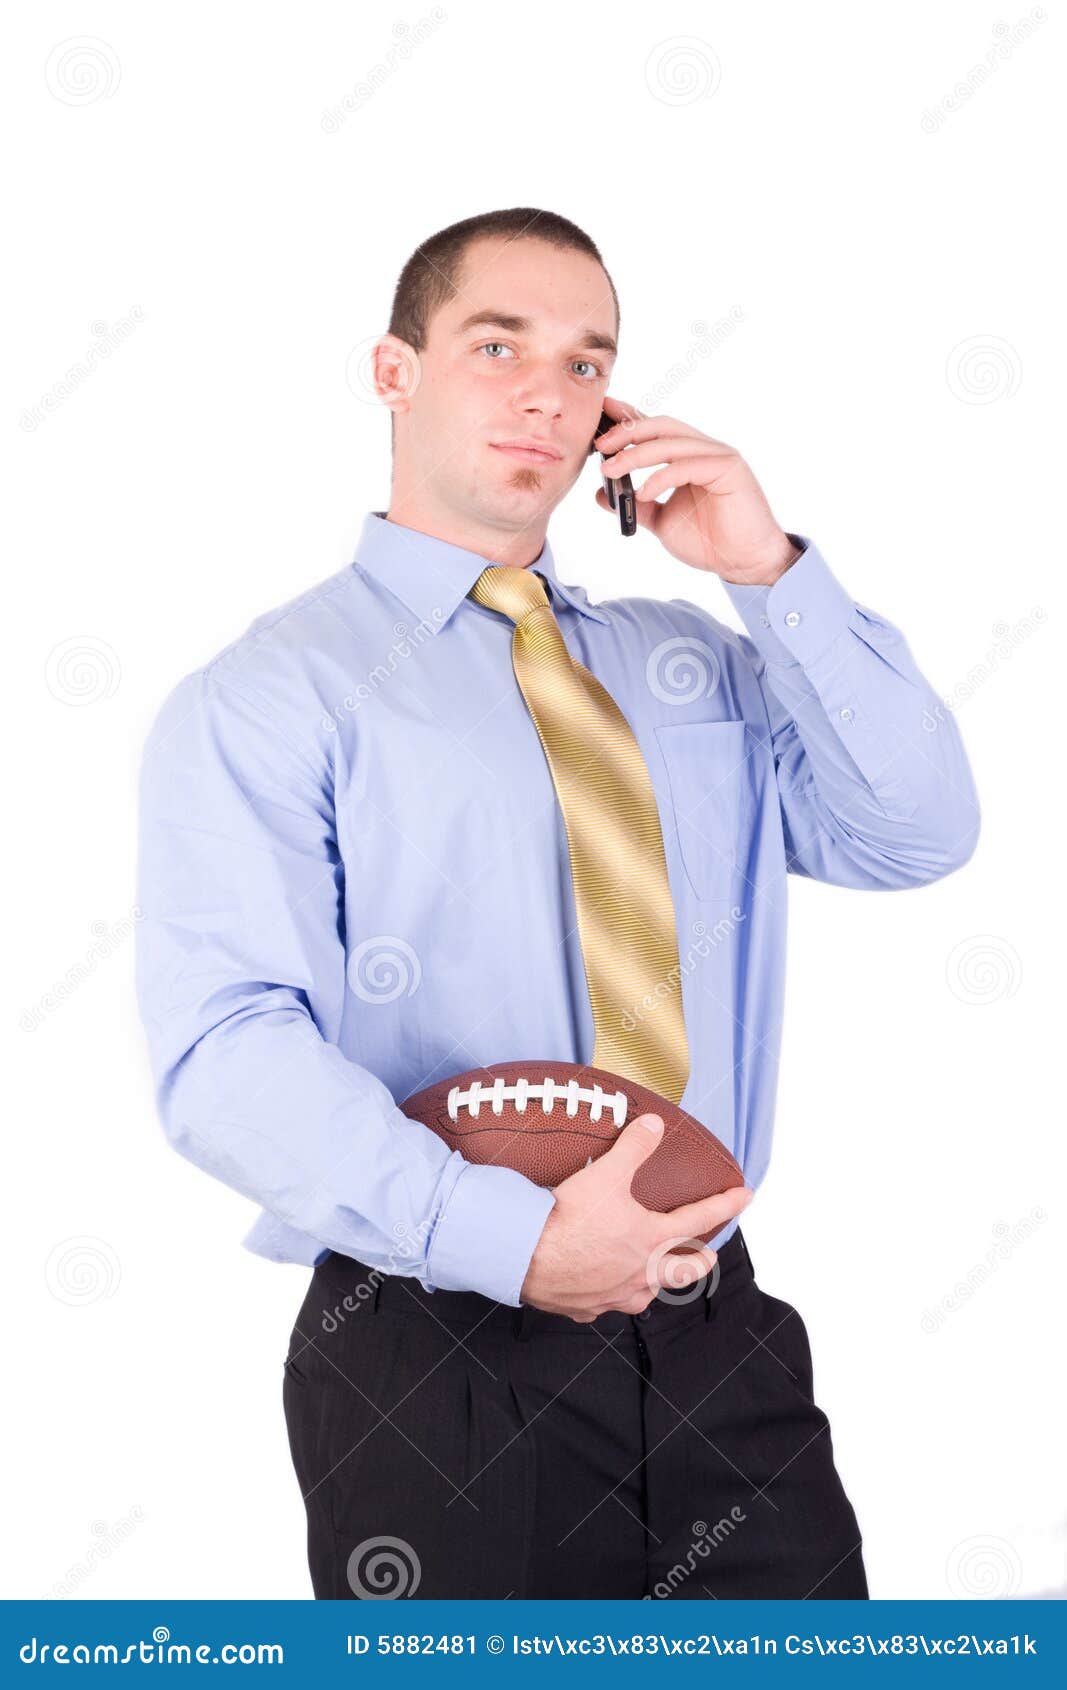 American football manager stock image. Image of equipment - 5882481